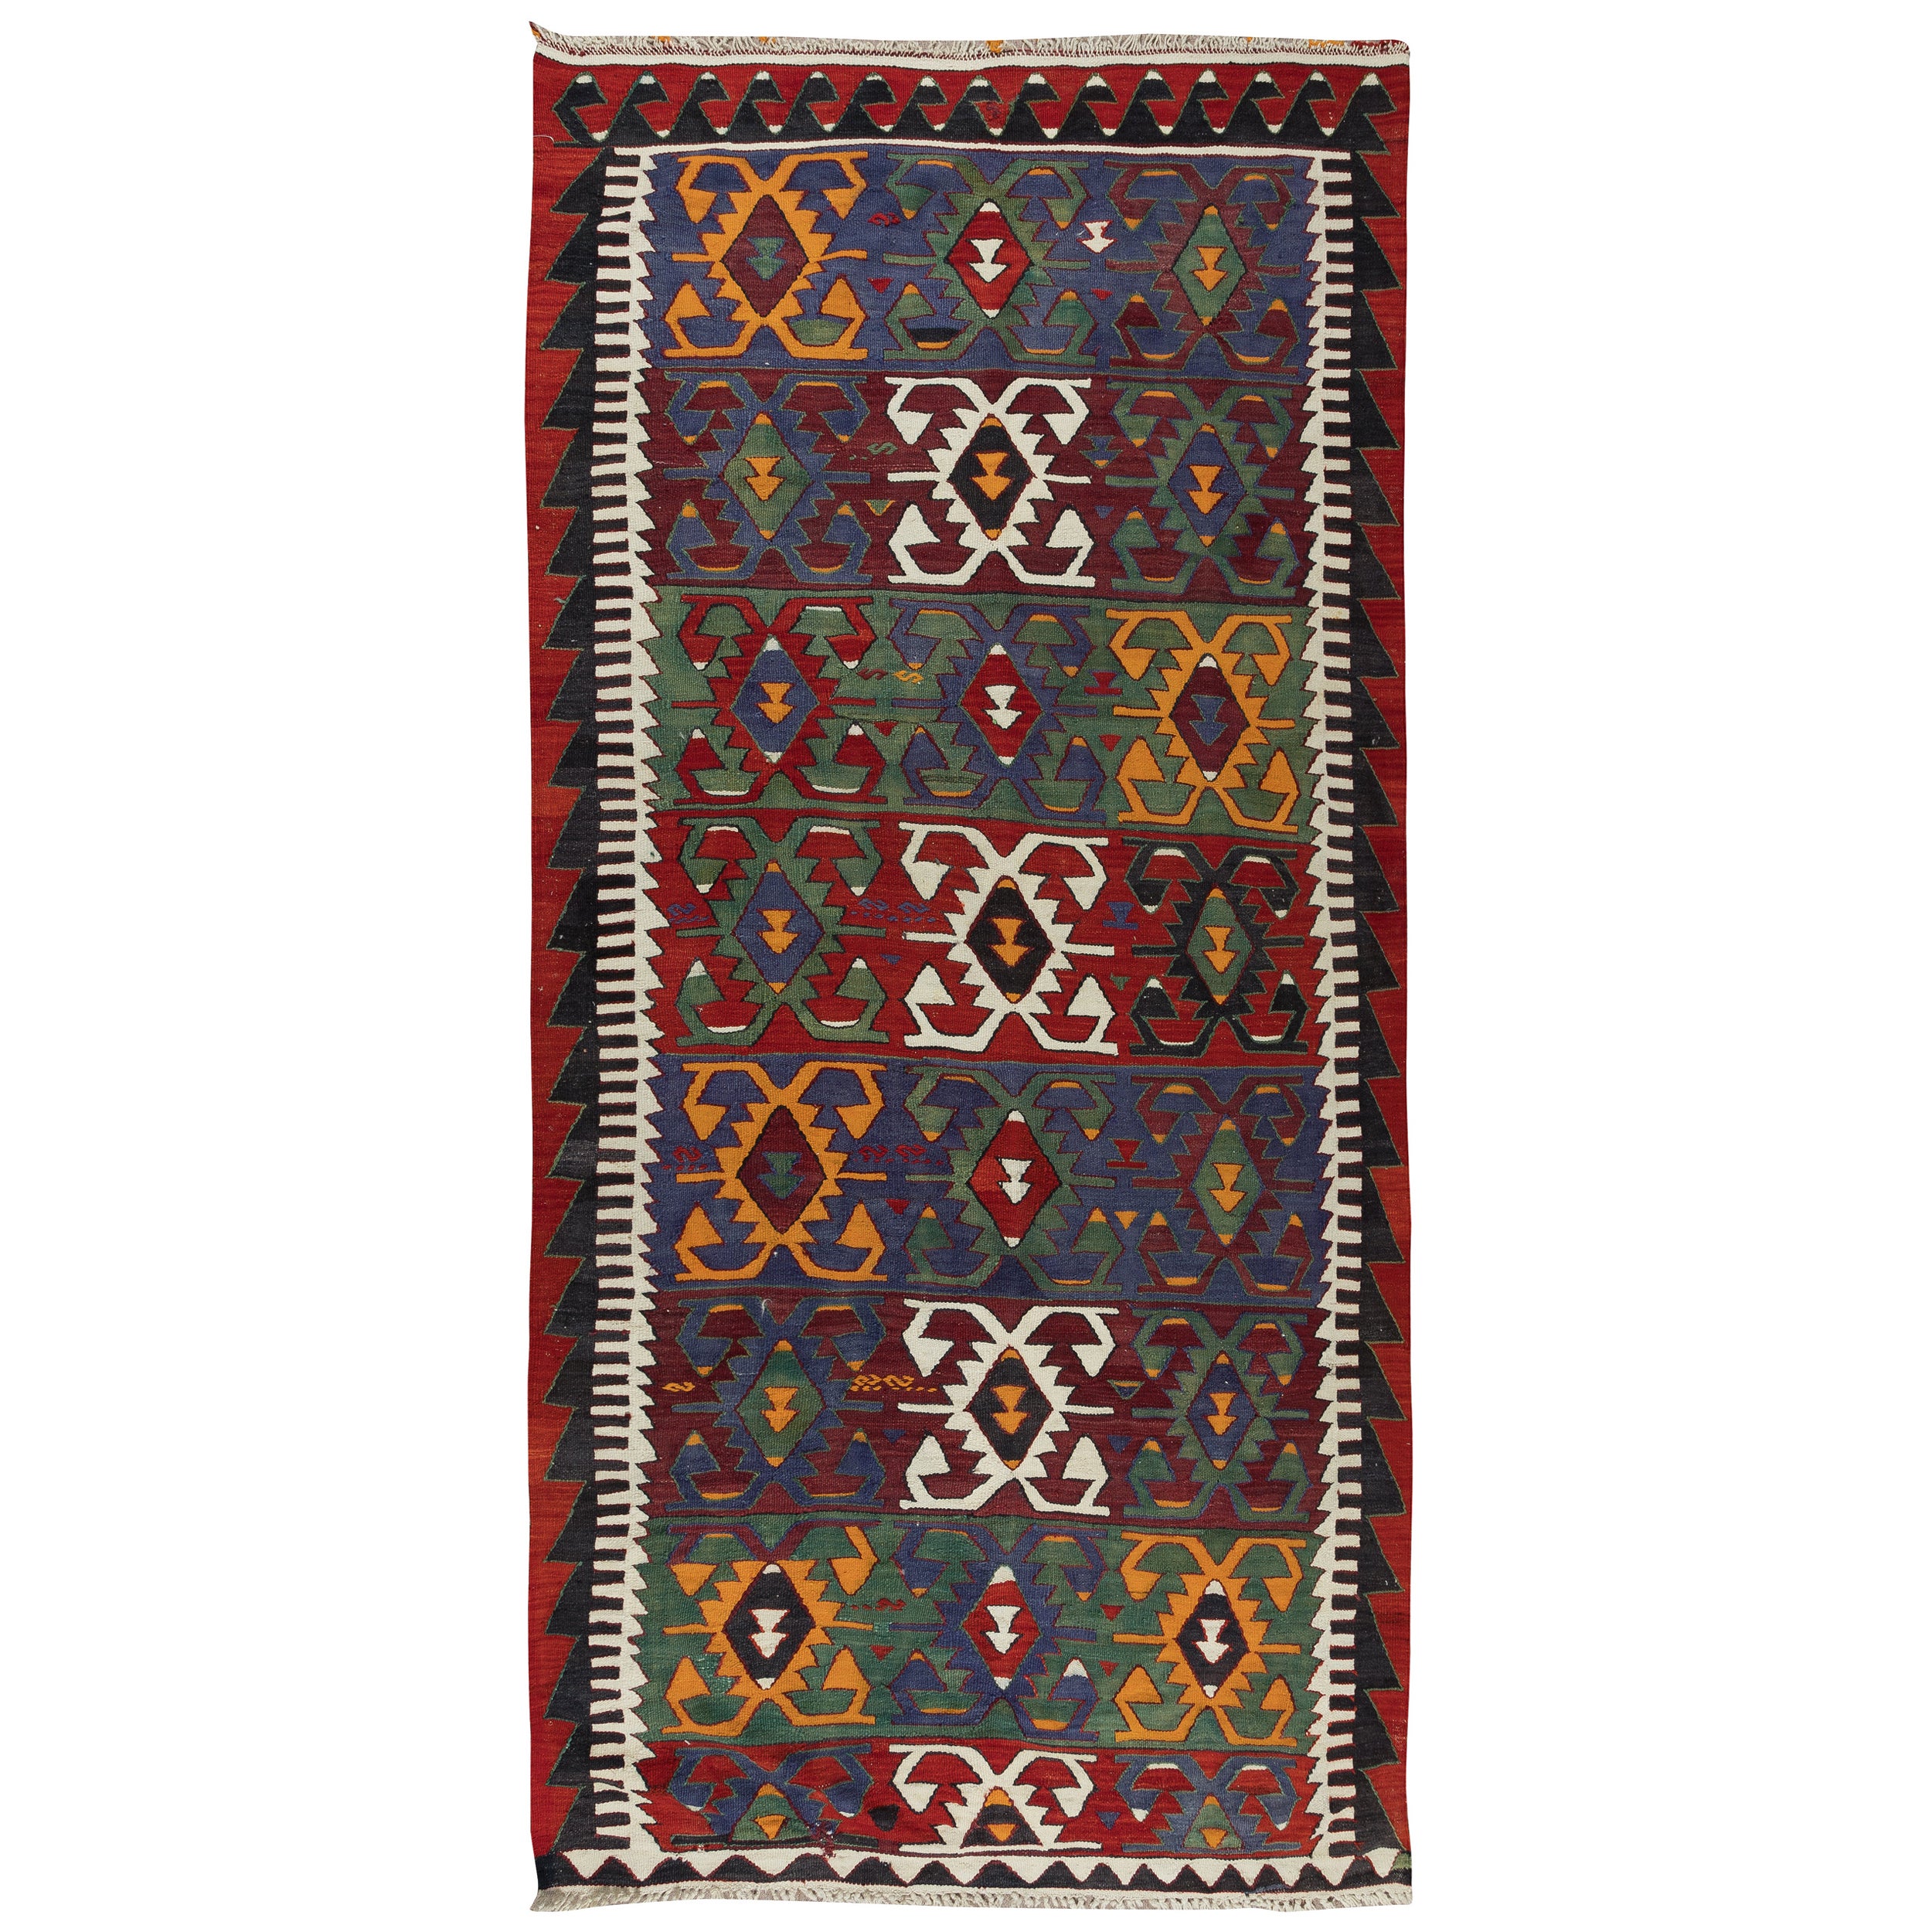 5.4x10.8 Ft Colorful Vintage Hand-Woven Turkish Kilim, Flat-Weave Rug, 100% Wool For Sale